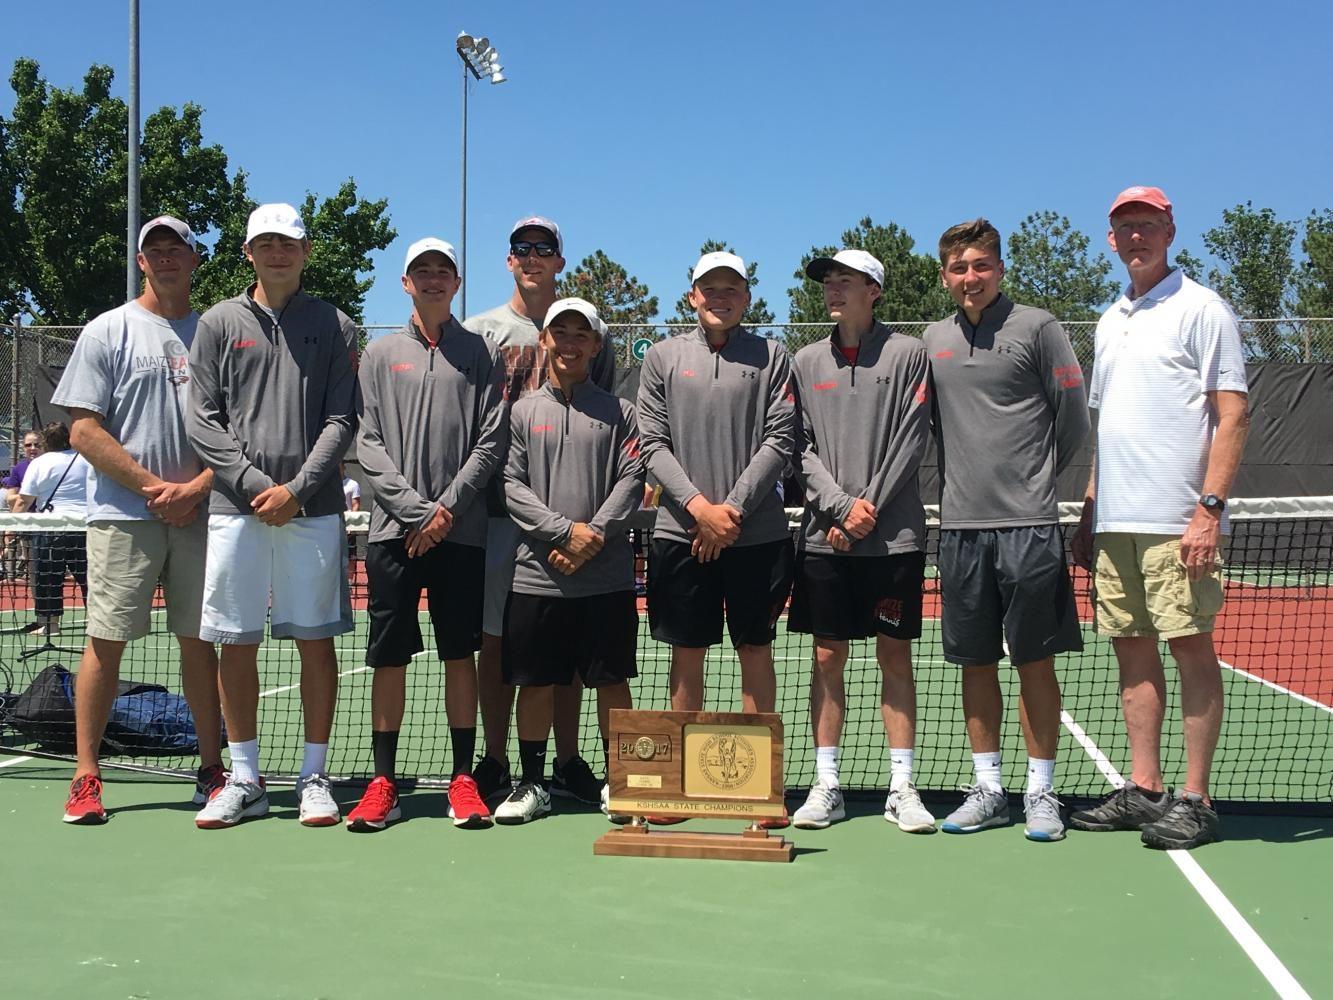 The boys took home the state title in Topeka.